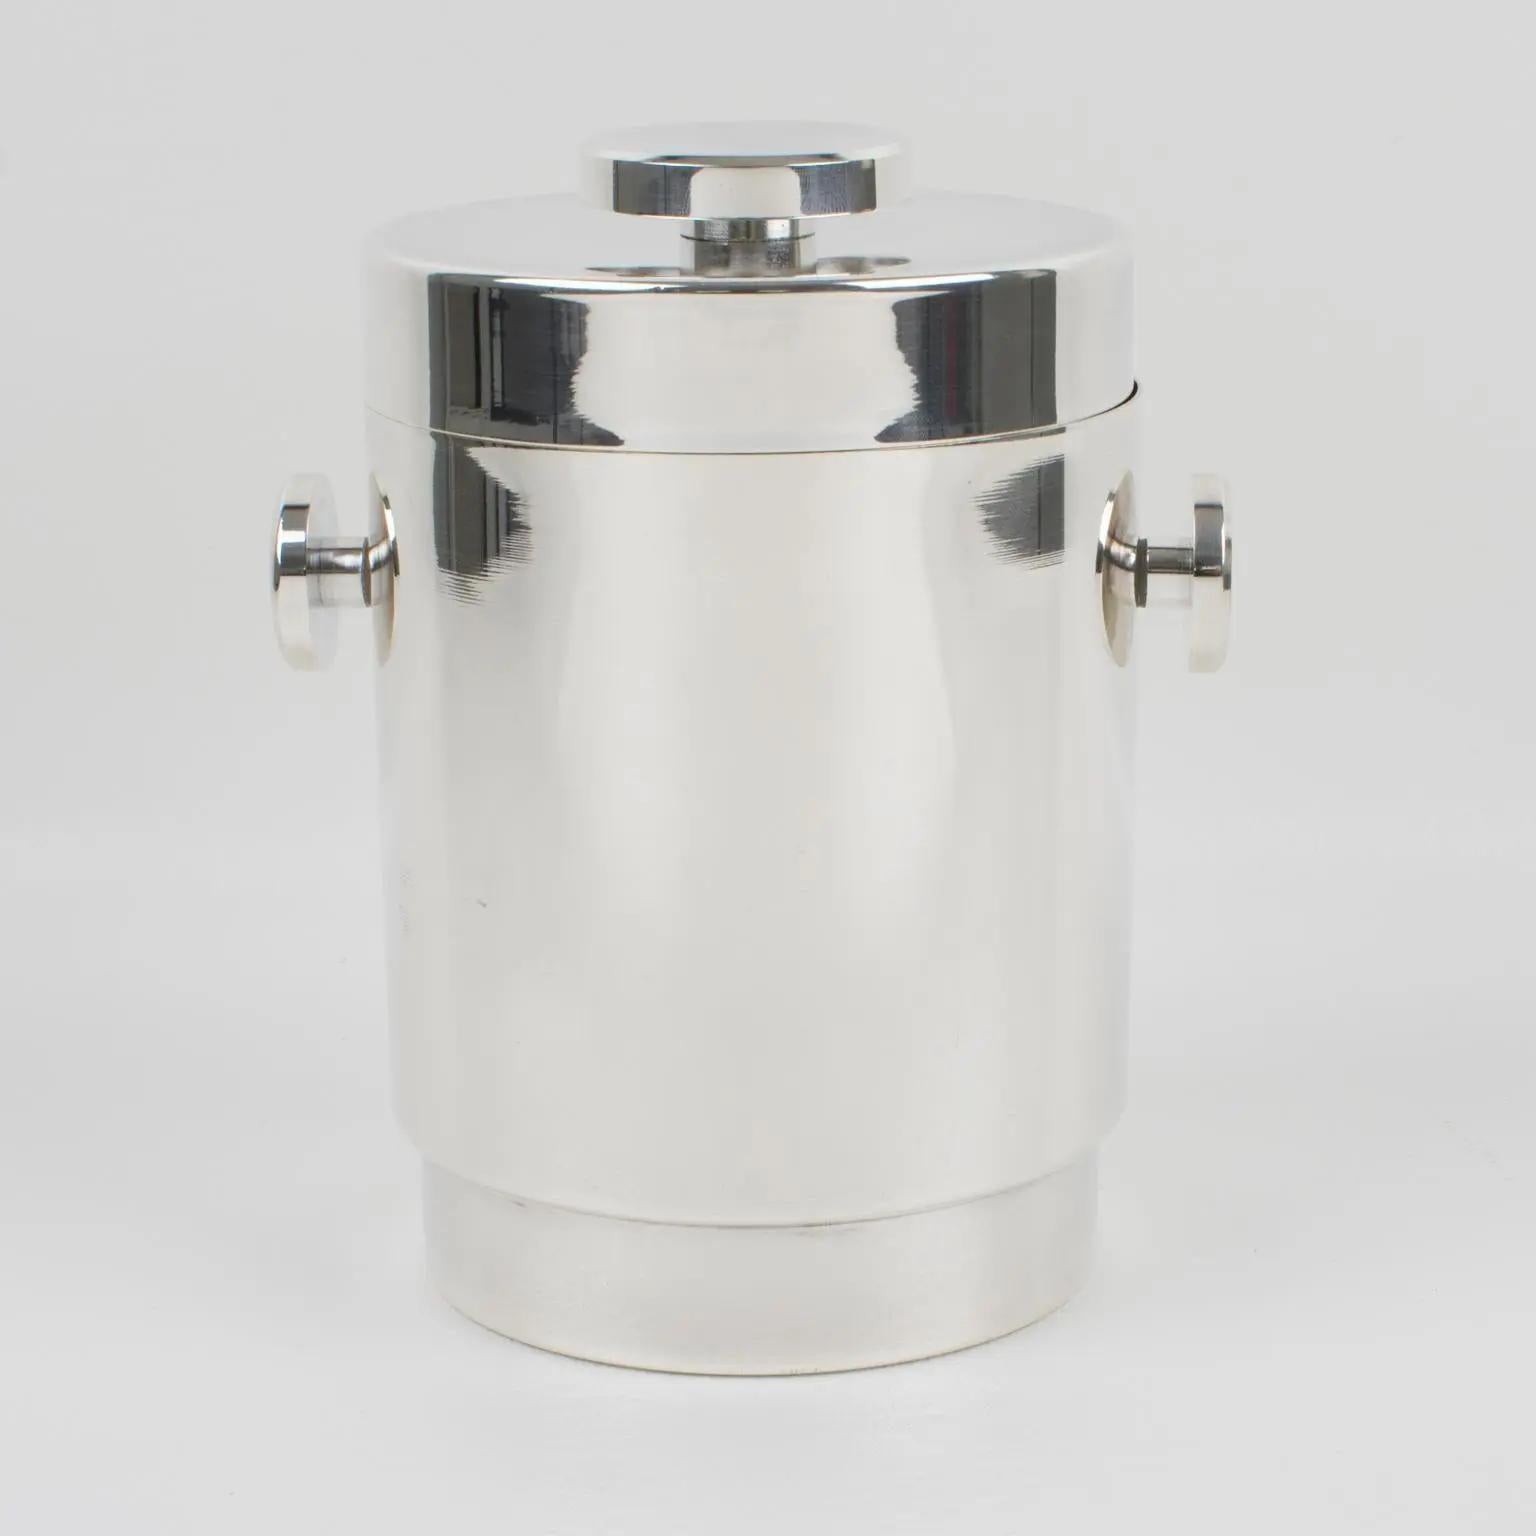 Mid-Century Modern Lancel Silver Plate Ice Bucket Cooler, France 1970s in Original Box For Sale